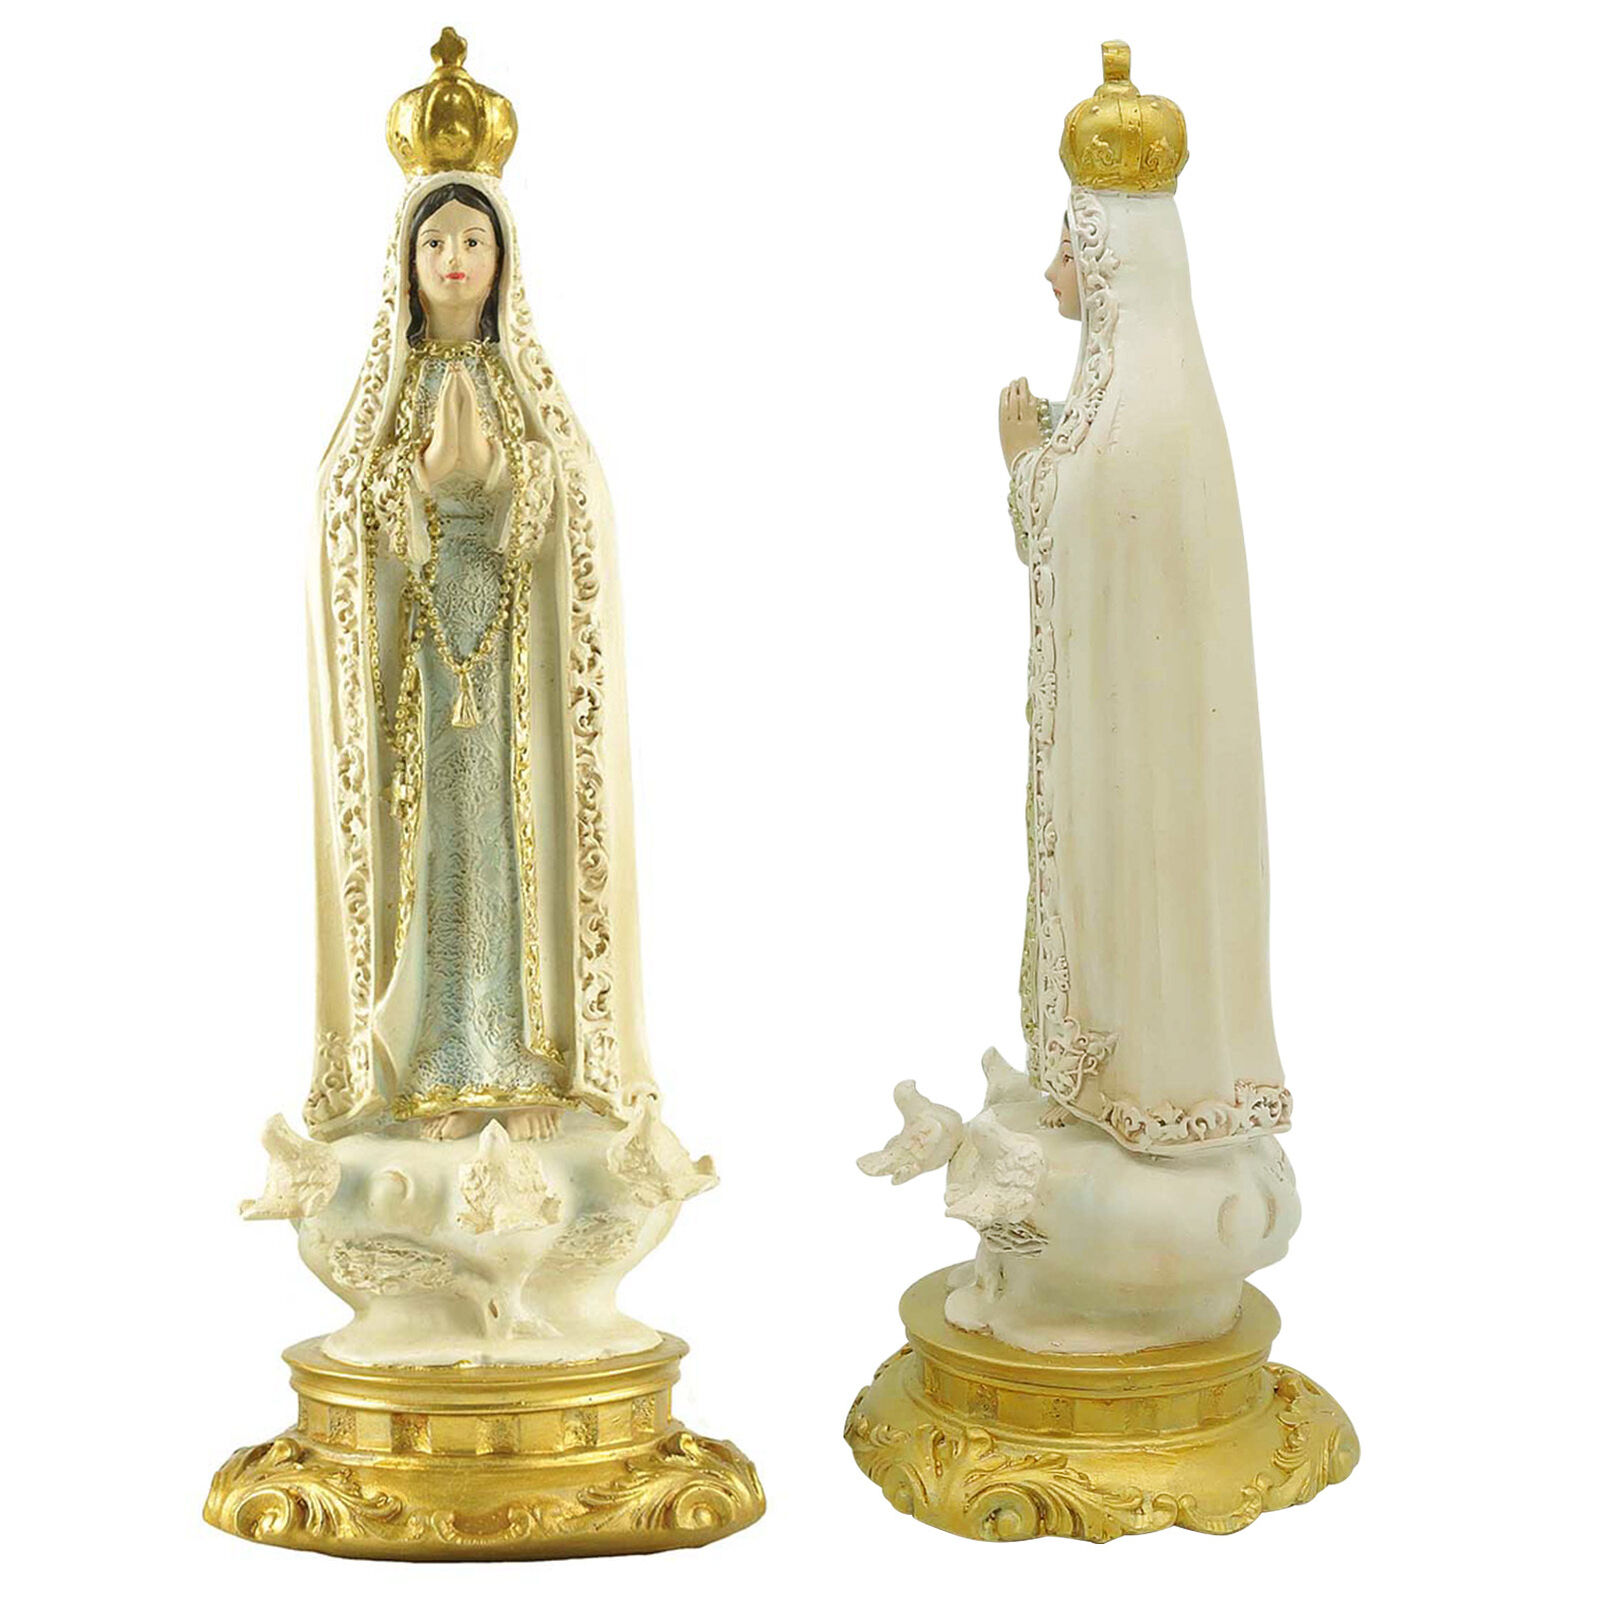 Blessed Virgin Mary Our Lady of Fatima Statue Ornament Figurine Sculpture Figure